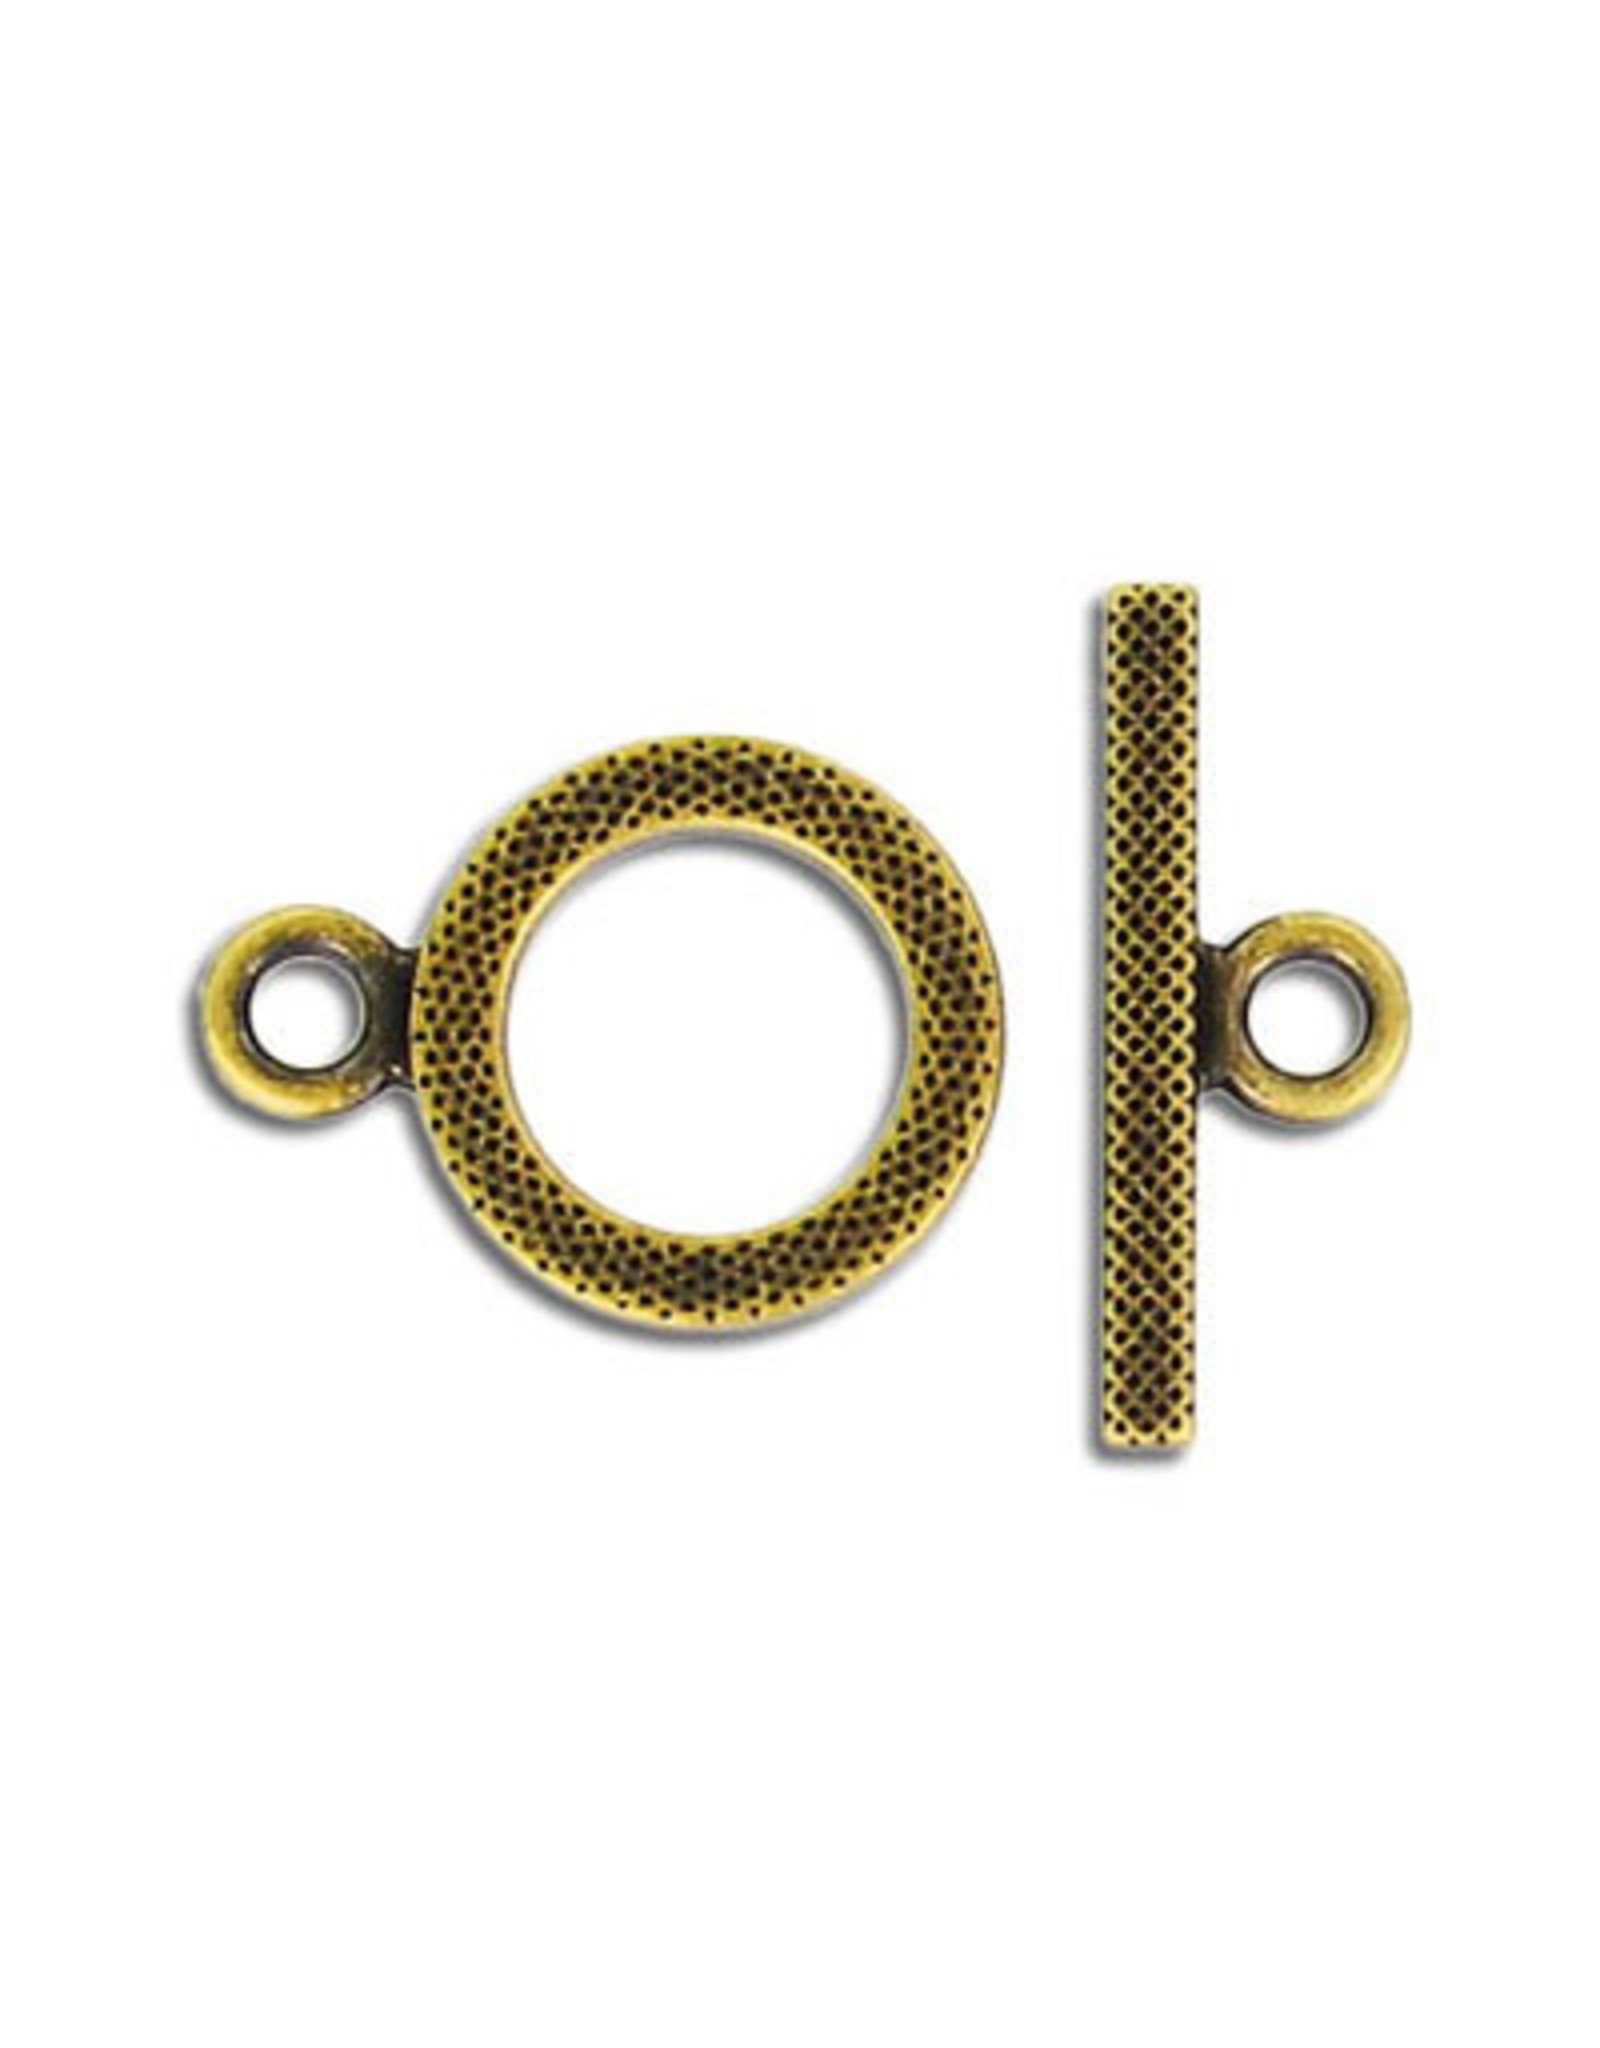 Toggle Clasp Round 16mm Antique Brass  NF  x5